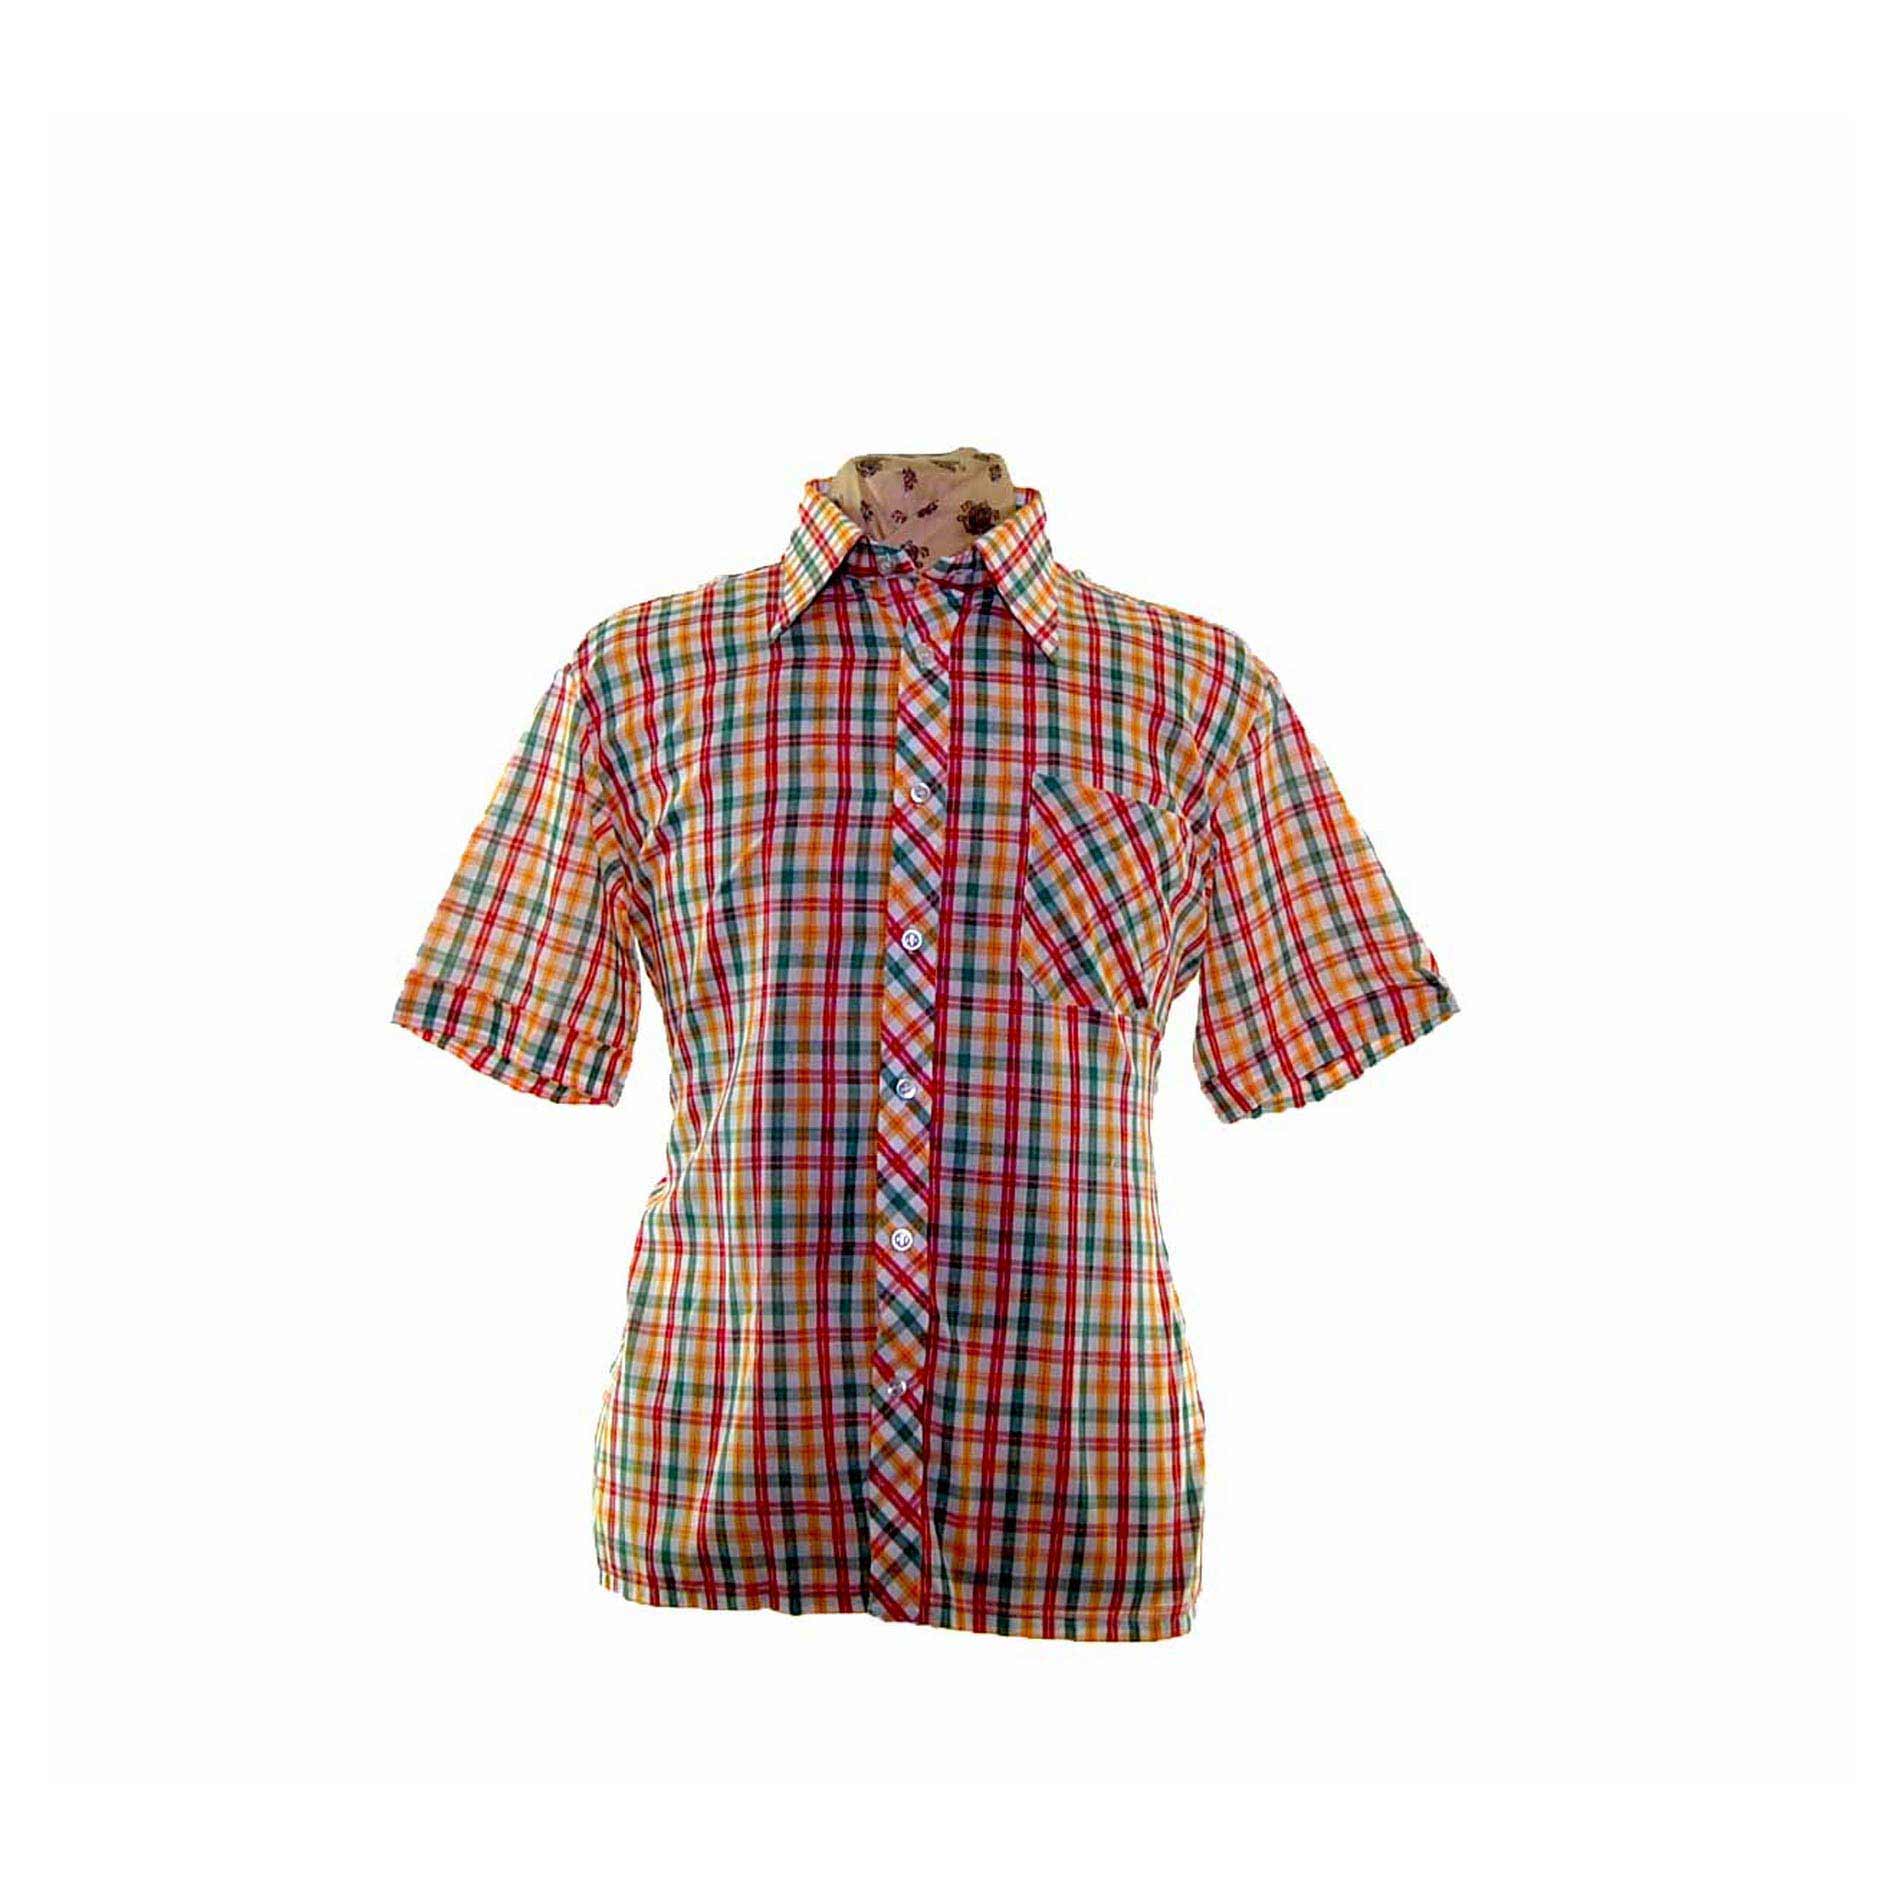 70s Short Sleeved Multicoloured Checked Shirt - Blue 17 Vintage Clothing